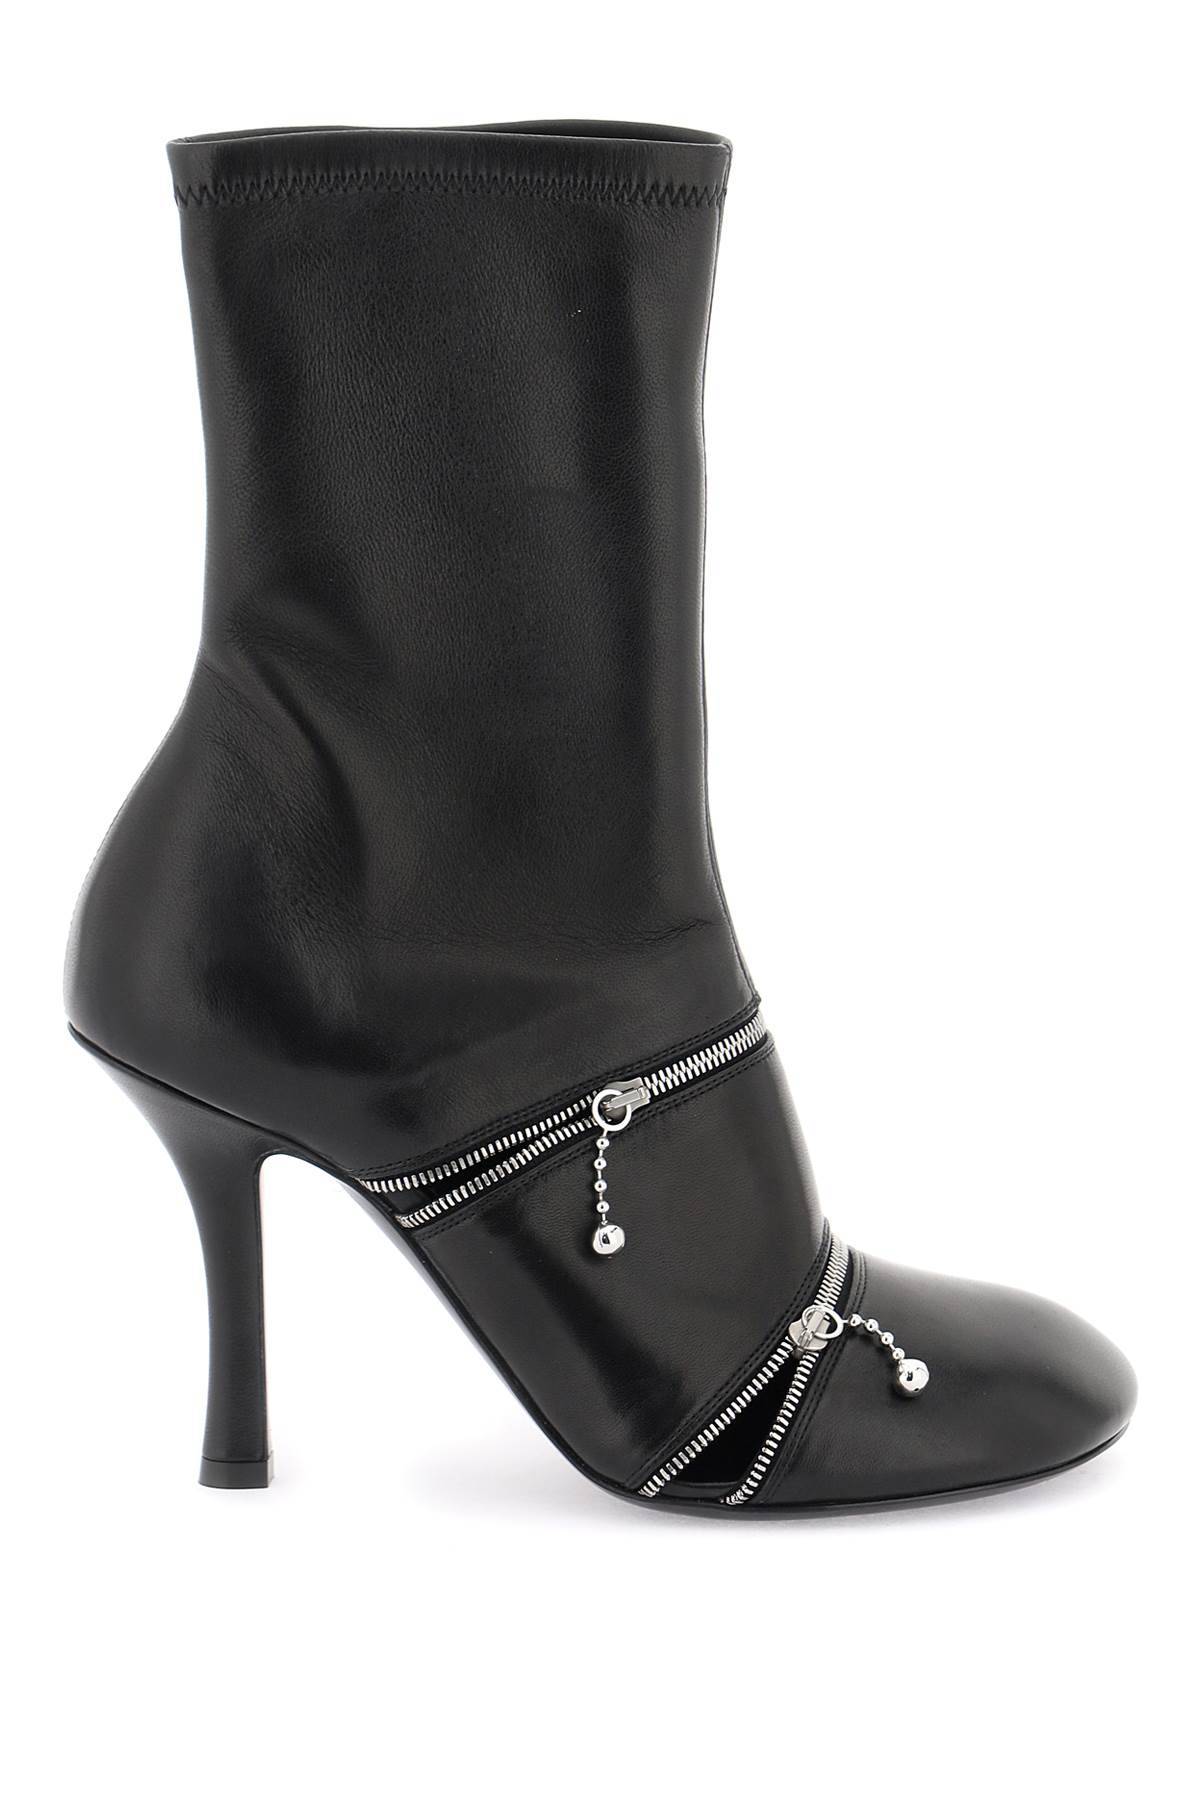 Burberry BURBERRY leather peep ankle boots